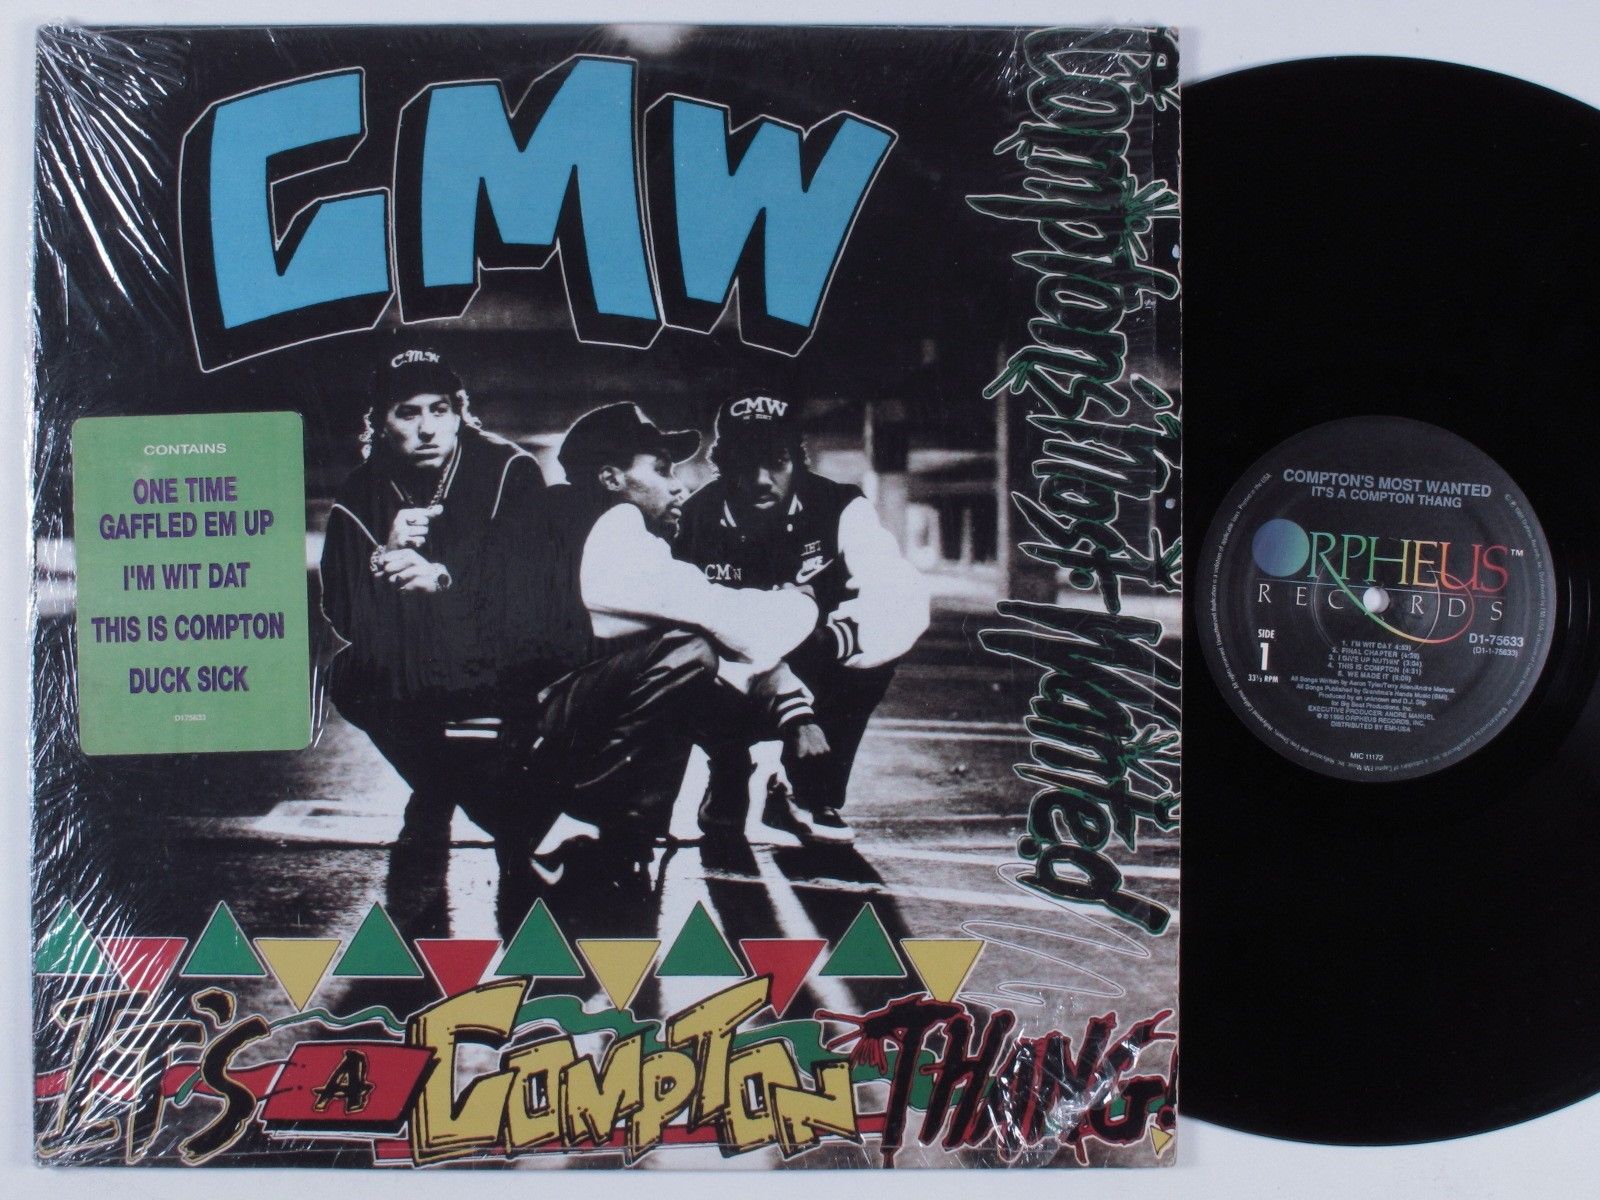 popsike.com MOST WANTED CMW It's A Compton Thang ORPHEUS LP SHRINK